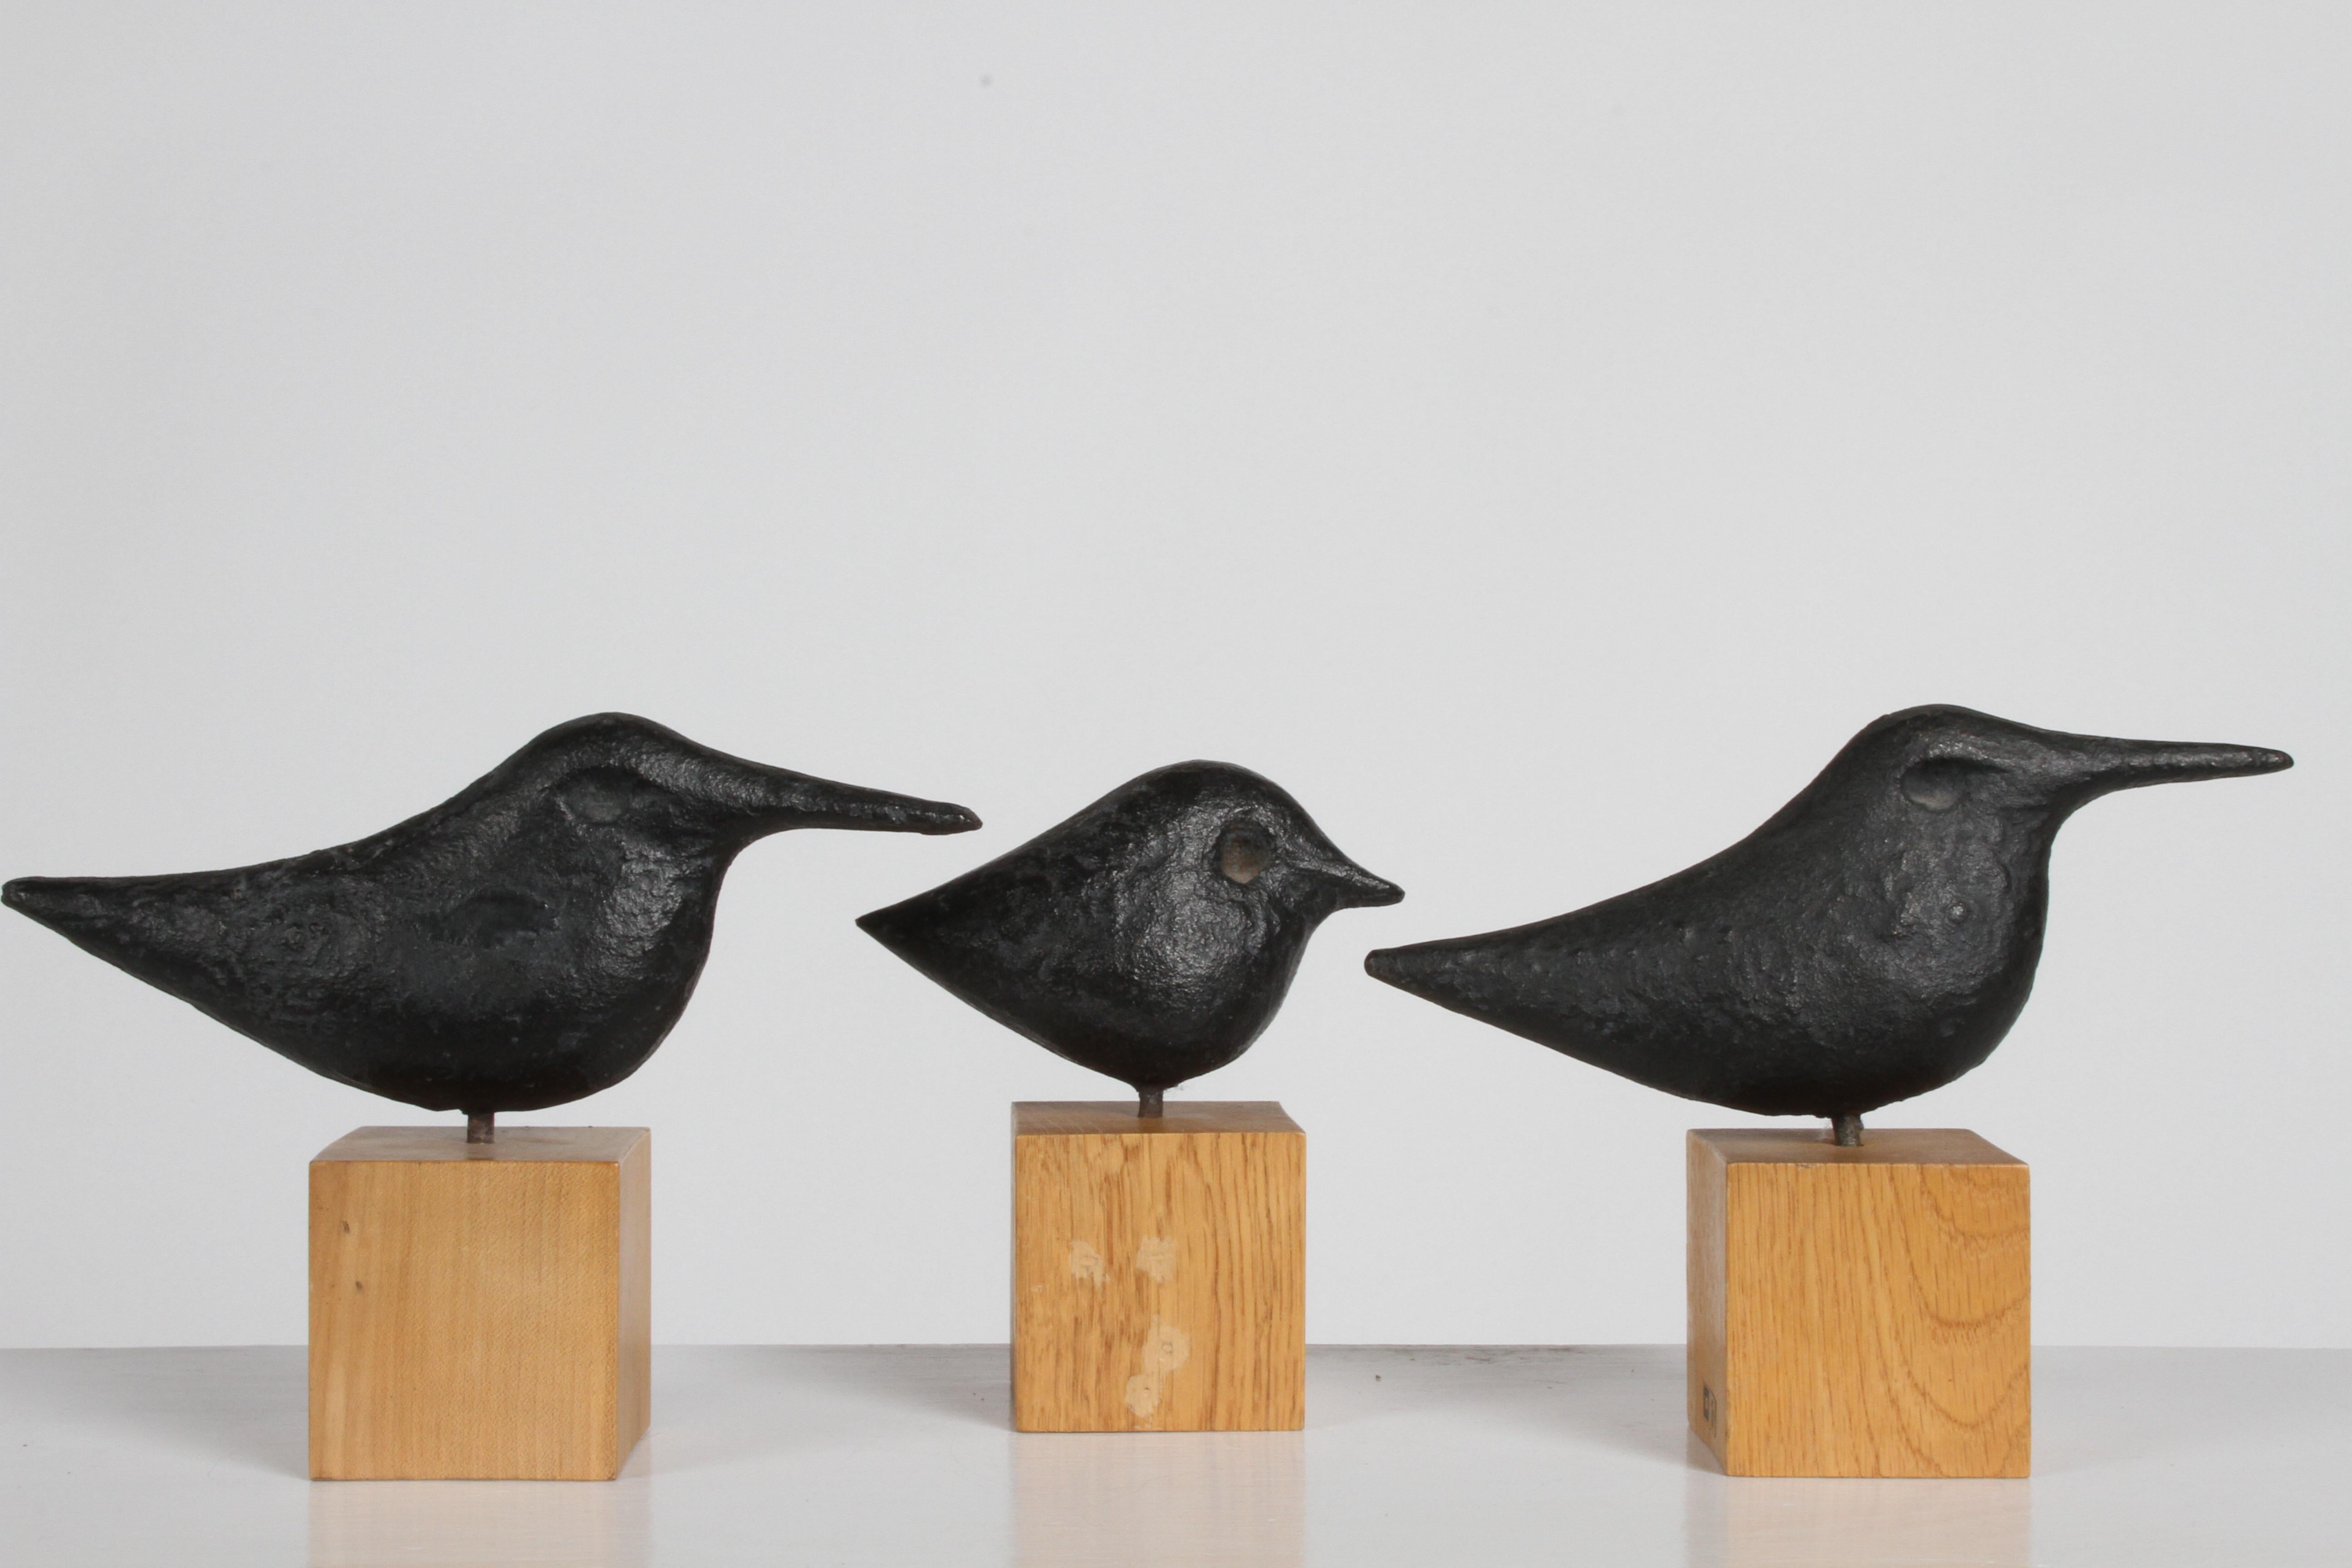 Set of three cast iron birds on wood cubes designed by Nobuho Miya (b. 1952). Miya a master forger of traditional cast iron, these cast iron birds reveal a Scandinavian influence that came from when Miya lived in Finland. 

Each is hand cast in